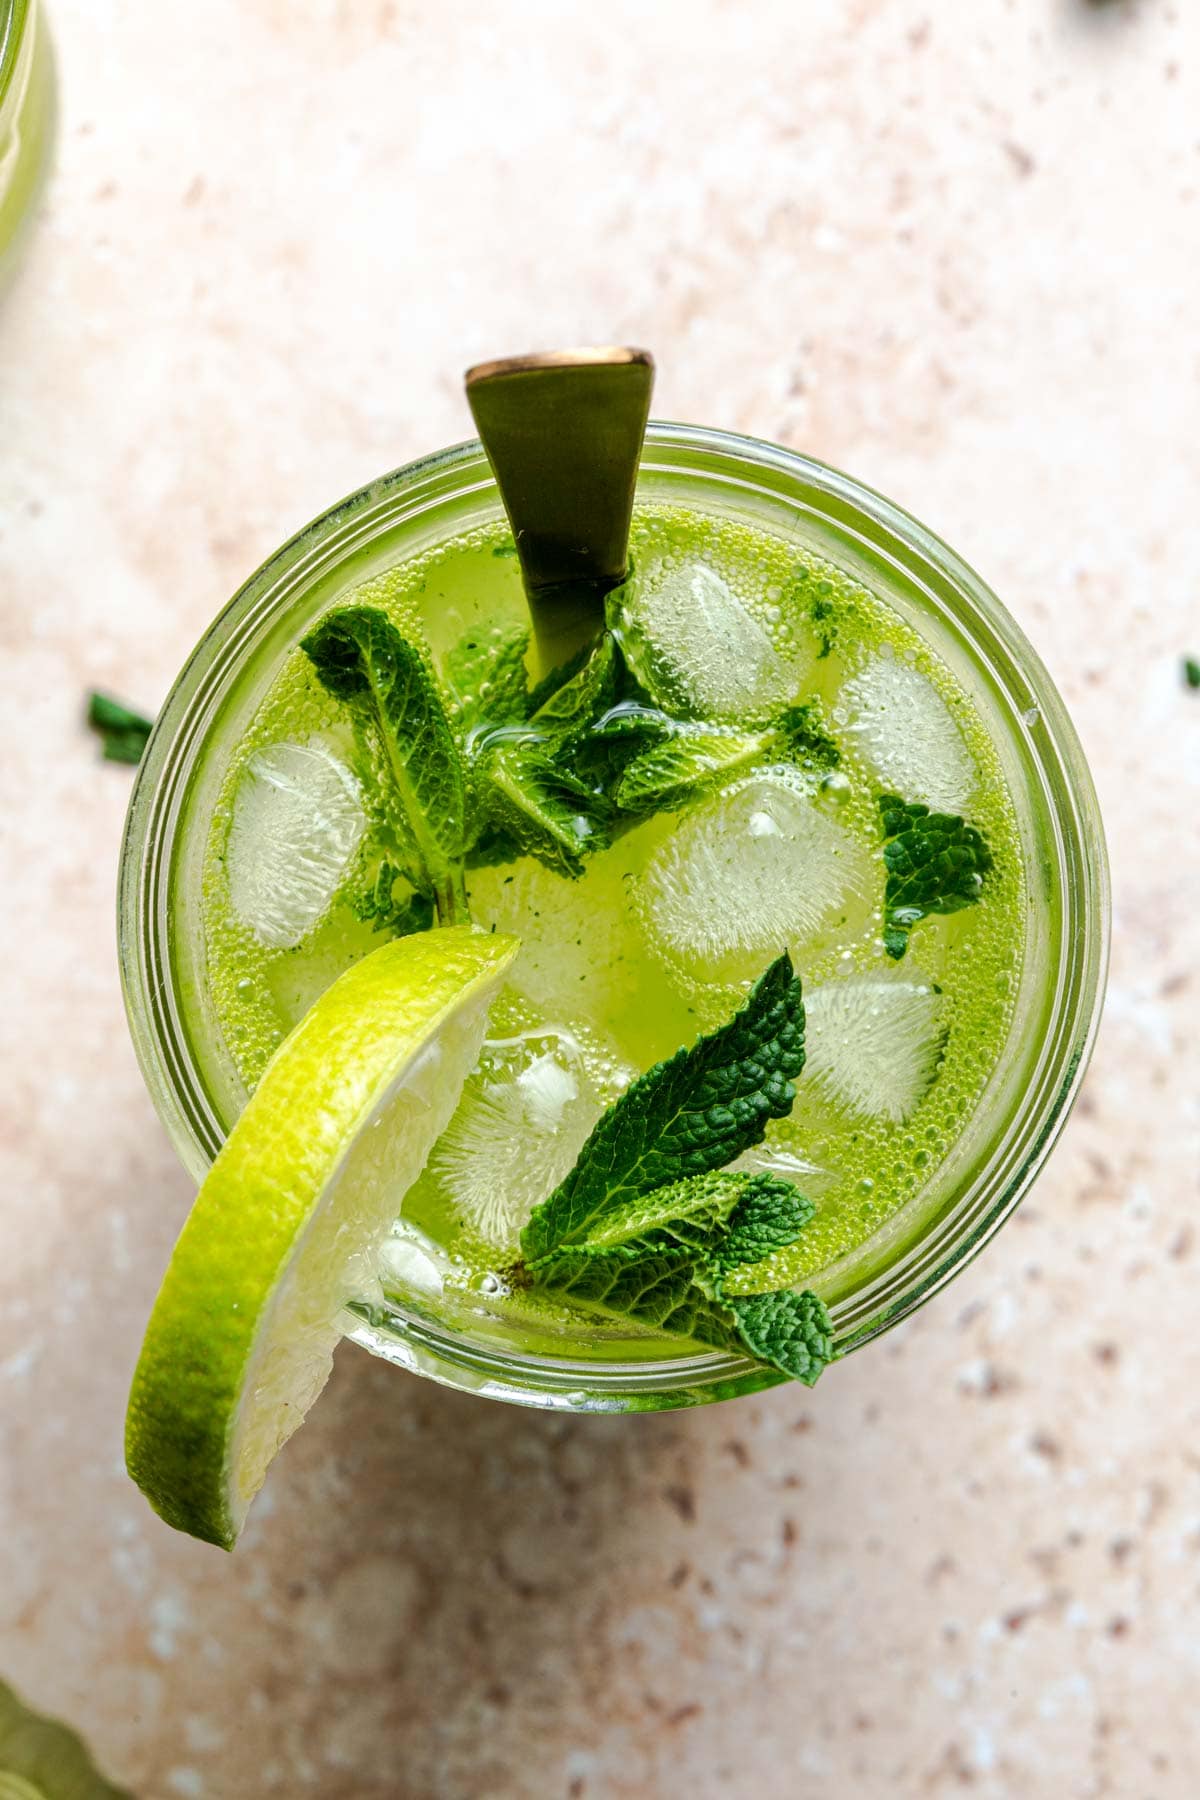 A close-up overhead image showing mojito cocktail.